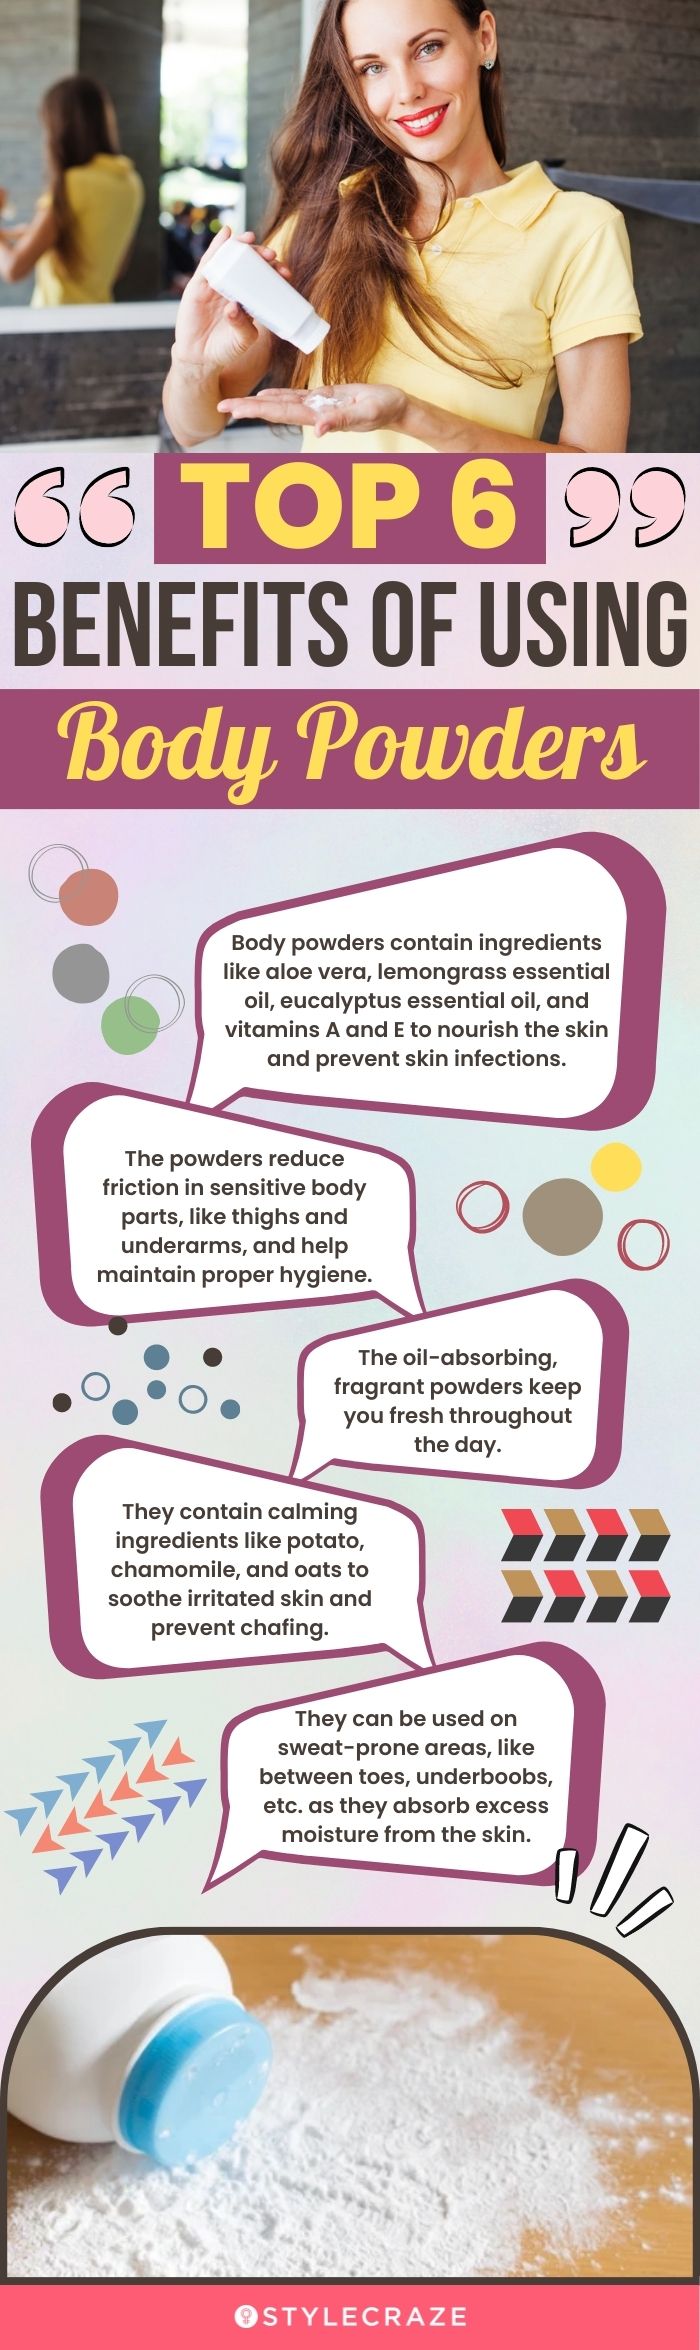 Top 5 Reasons To Use Body Powder